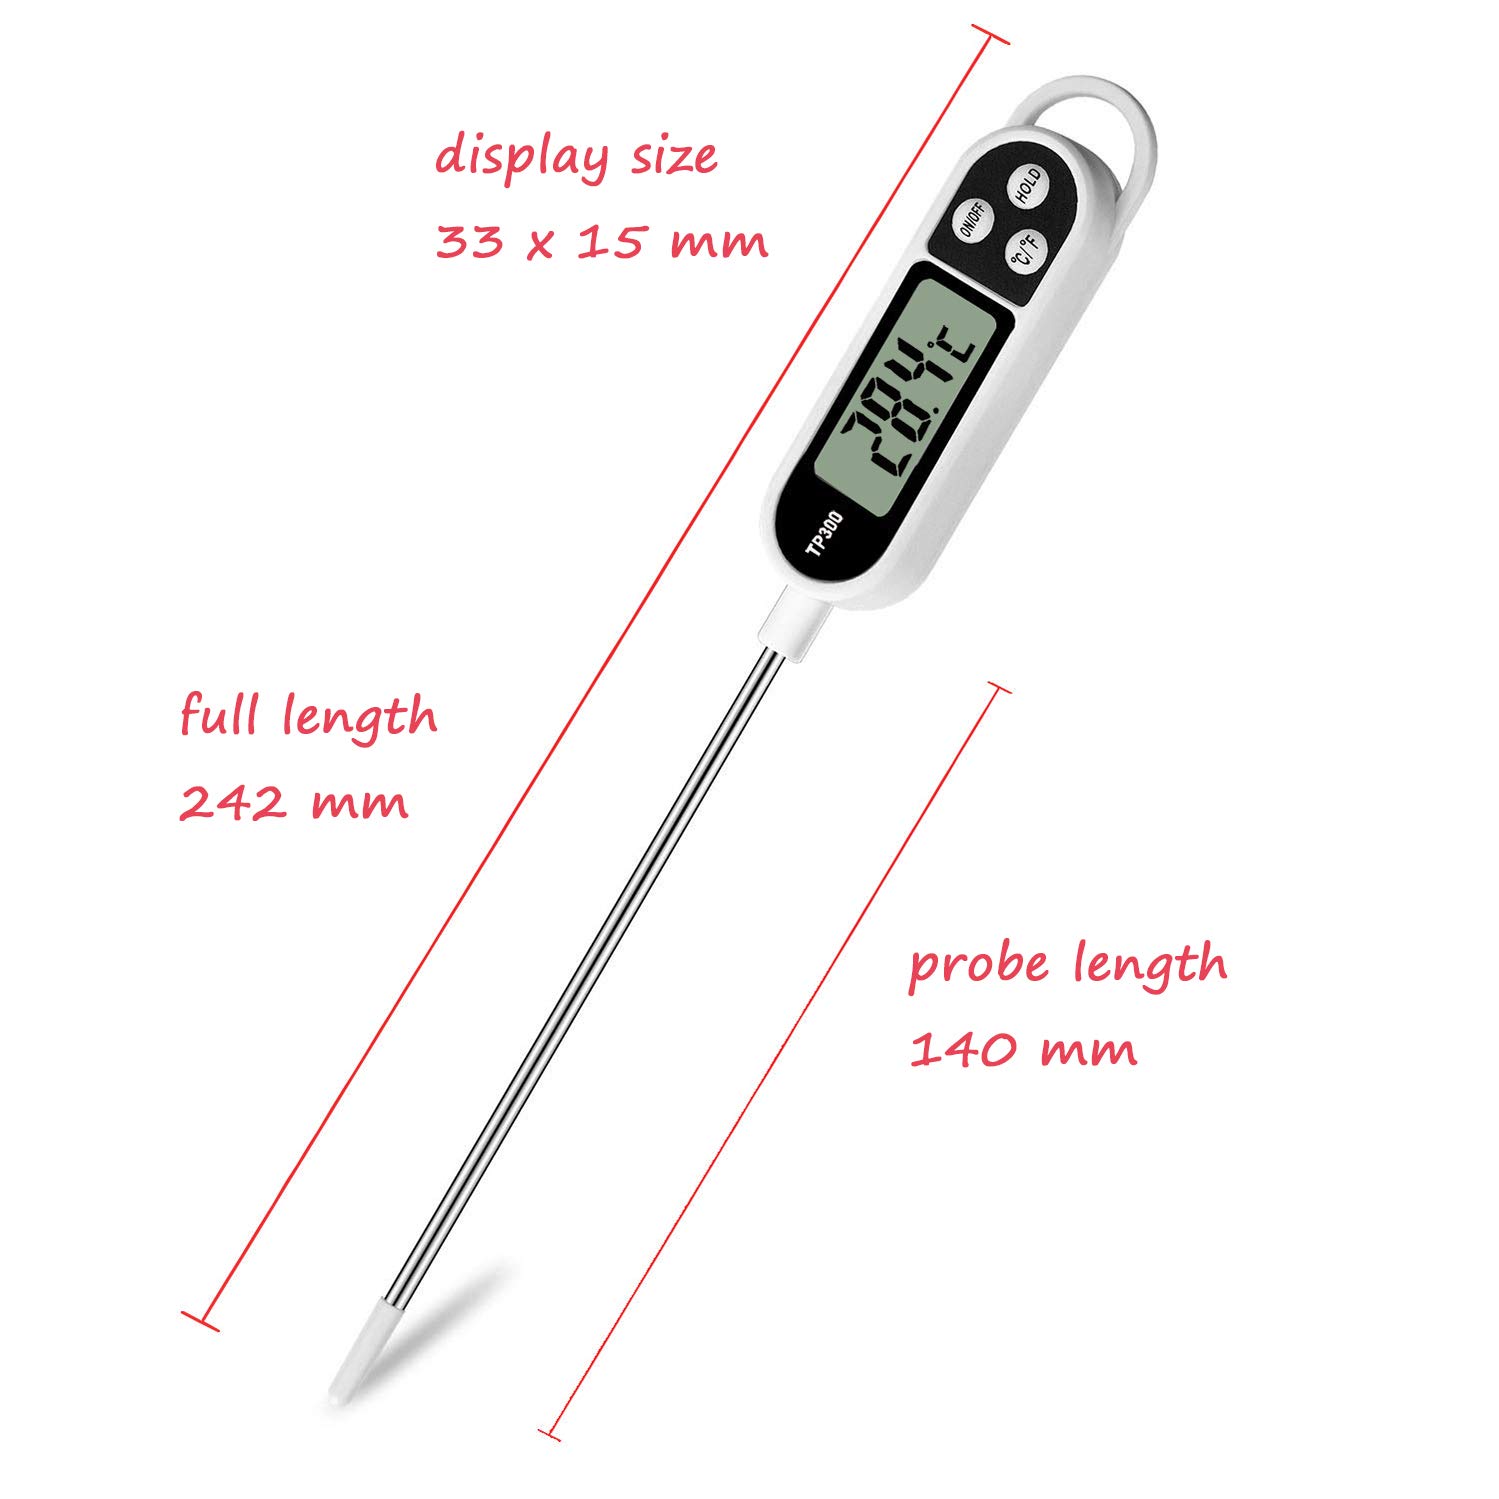 Meat Food Candy Thermometer, Probe Instant Read Thermometer, Digital Cooking Kitchen BBQ Grill Thermometer with Long Probe for Liquids Pork Milk Yogurt Deep Fry Roast Baking Temperature